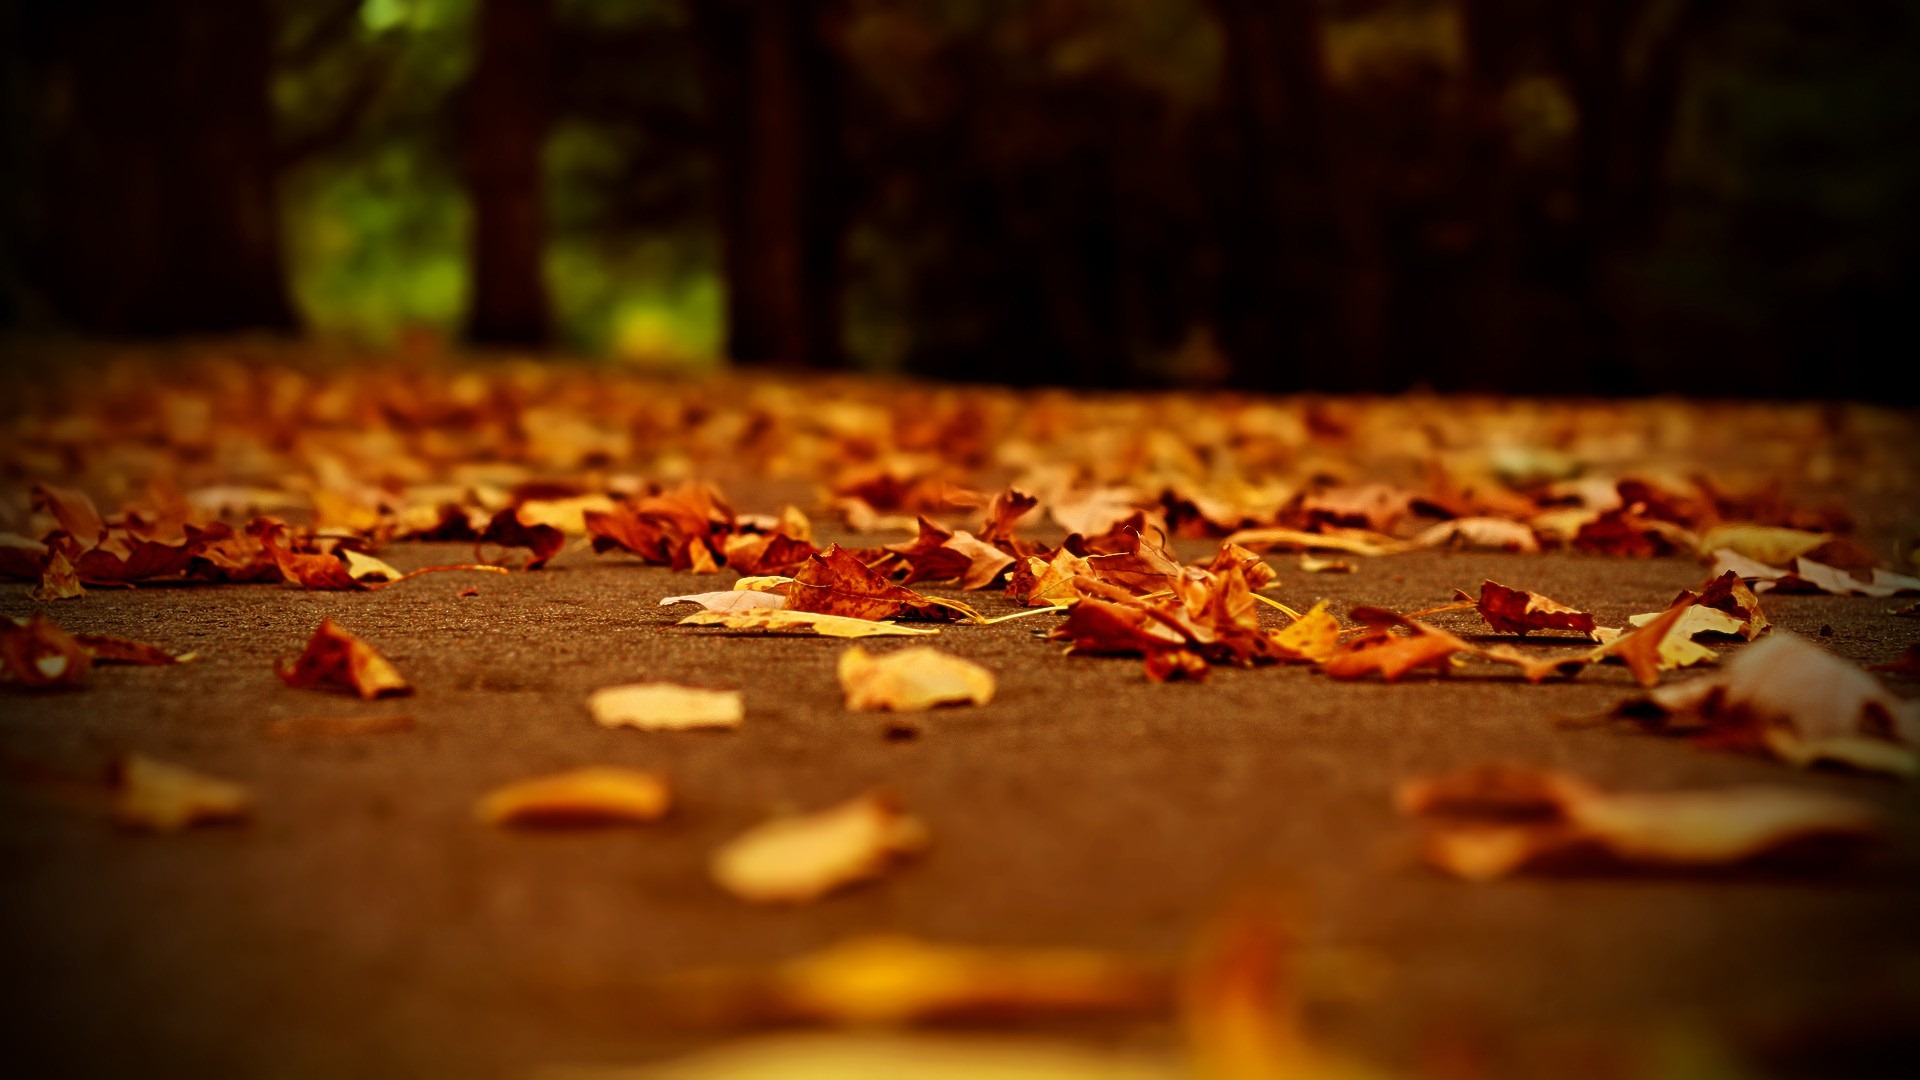 Leaves Yellow Autumn Wallpapers Wallpapers, Backgrounds, Images